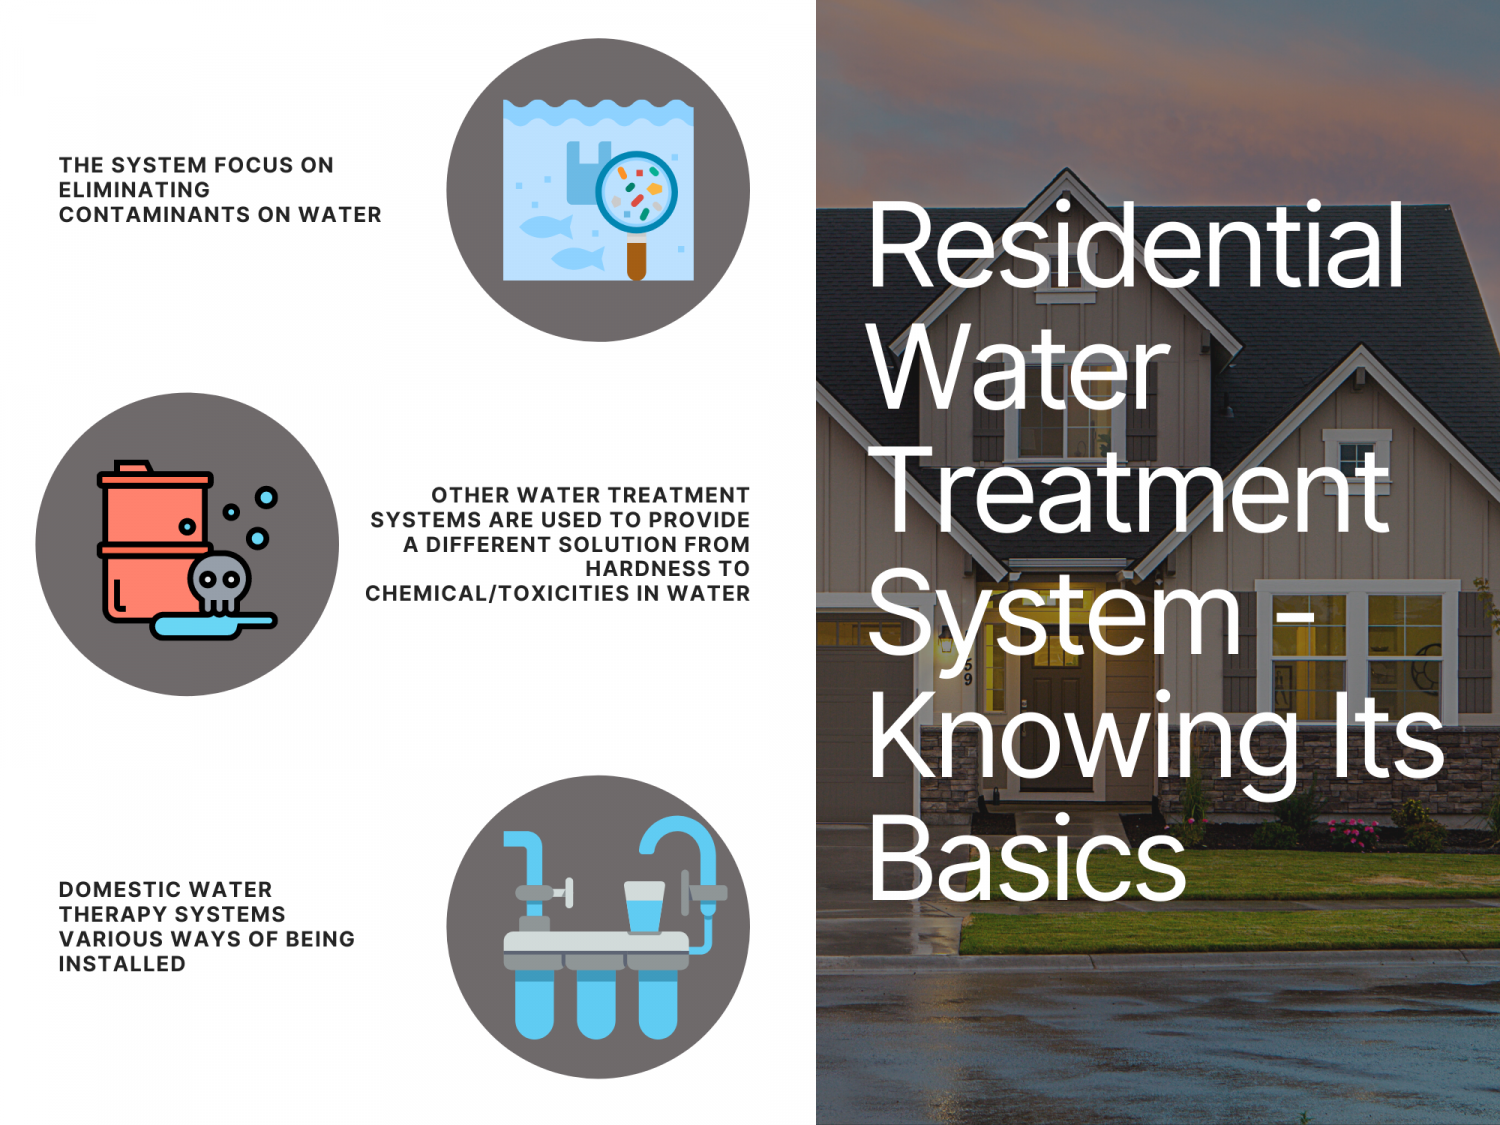 Residential Water Treatment System - Knowing Its Basics Infographic